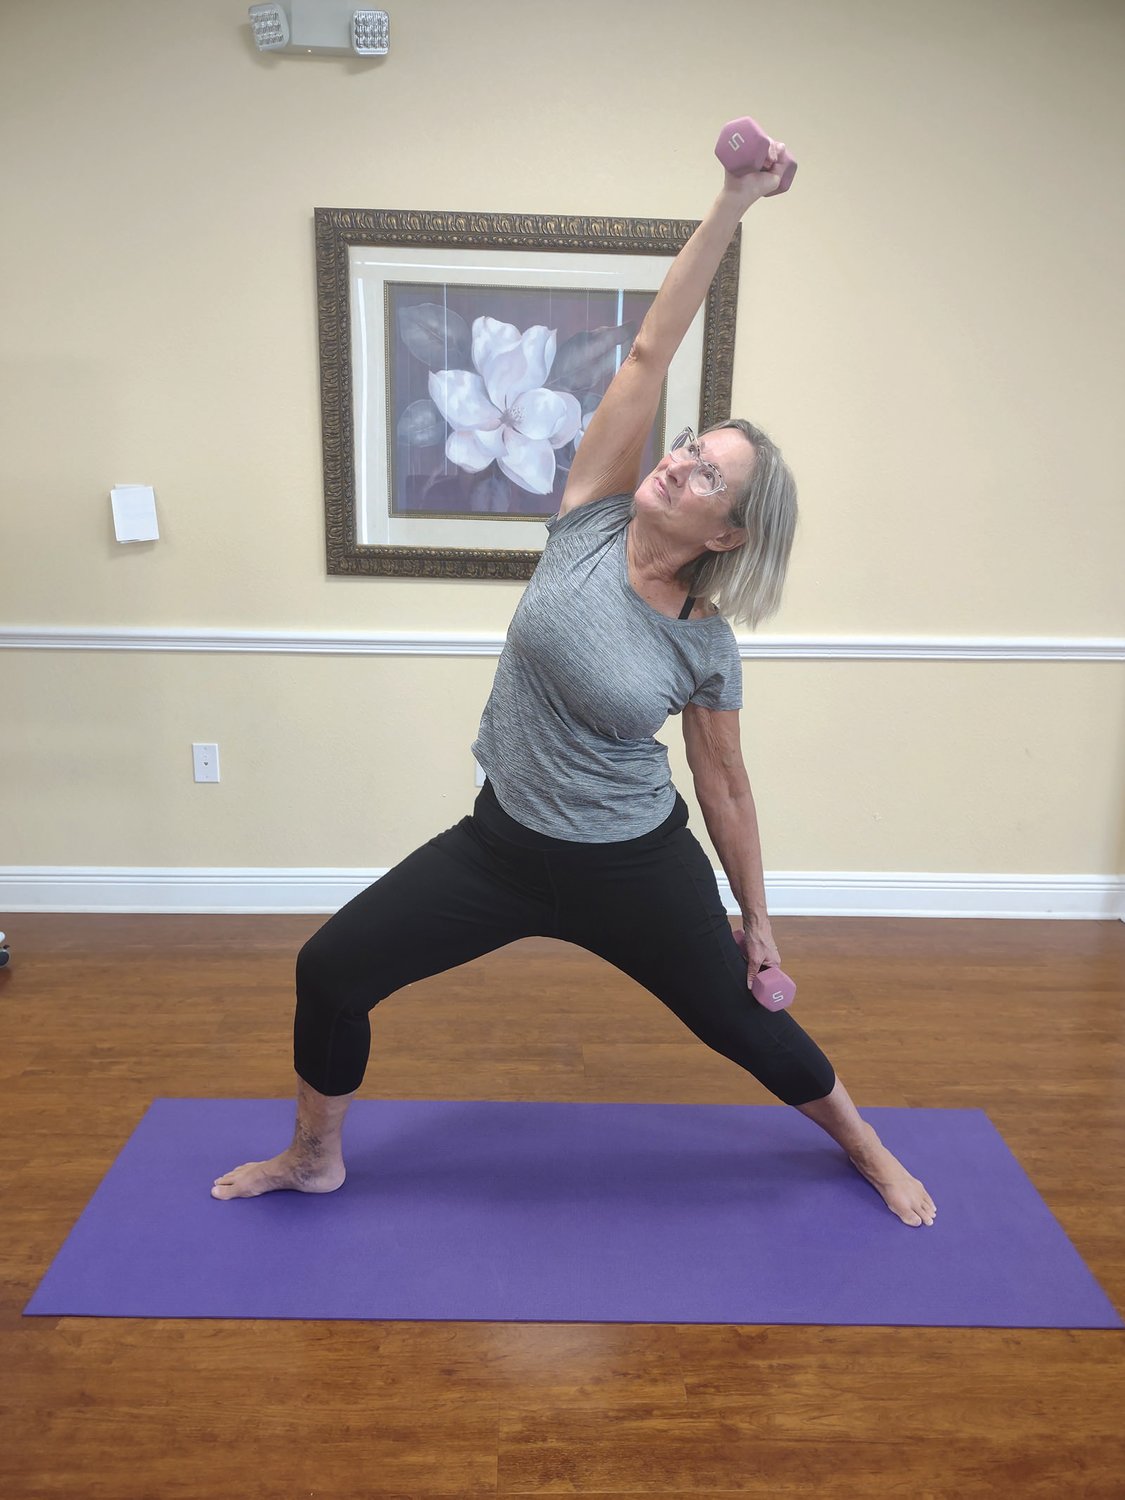 Observe in the photo, Mary Loe, Yoga practioner -- at the Shield Medical Group in Sebring -- performing “Modified Warrior Pose” using 2-pound weights in each hand. One arm is extended straight down the thigh with a deep knee bend and the other arm lengthened down the opposite leg. Hold this posture for several long breaths to strengthen core muscles. You can do it!